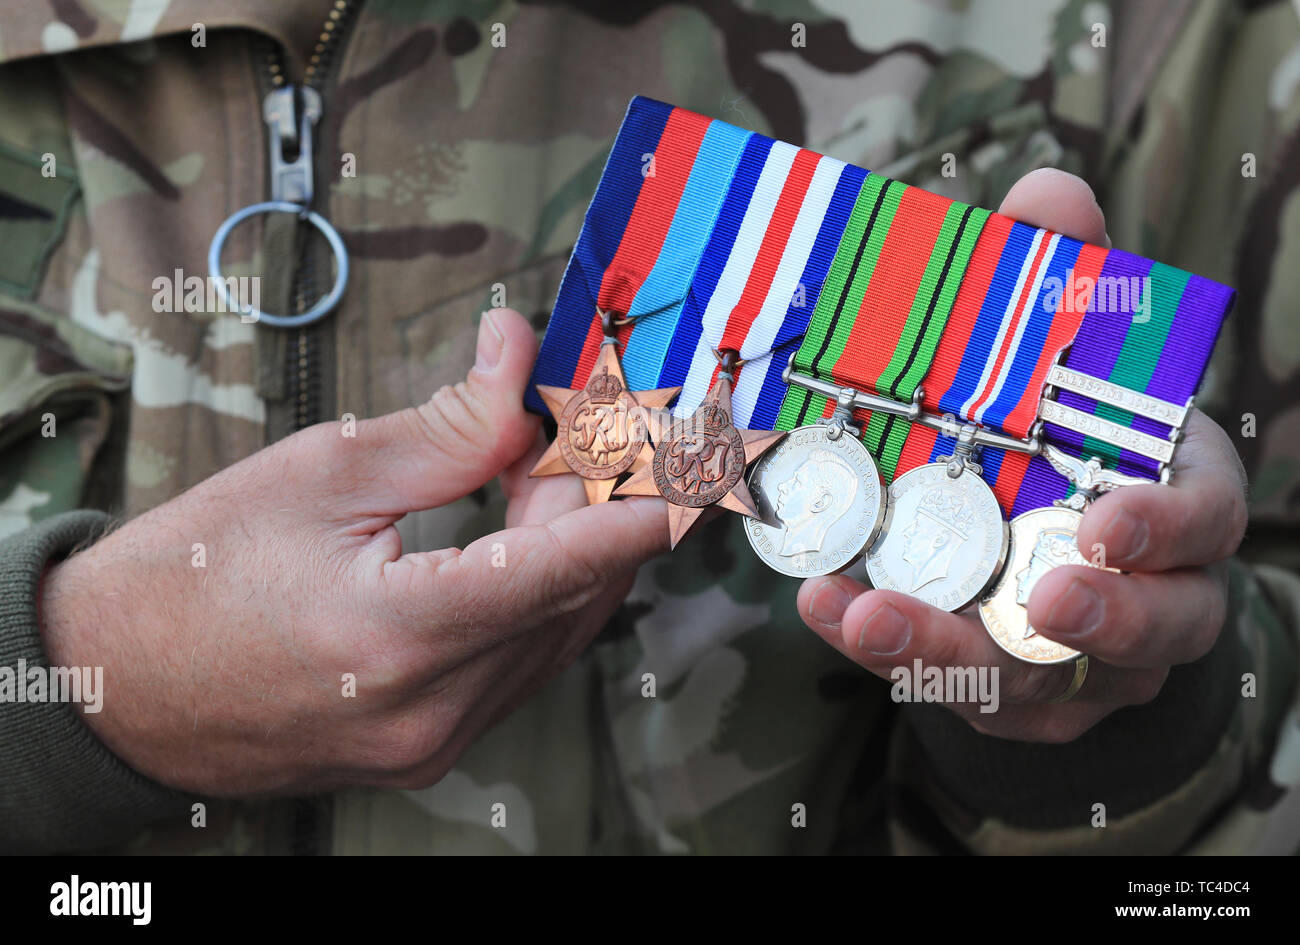 Colonel Andrew Jackson, Deputy Commander 16 Air Assault Brigade, holds the medals earned by his wife Kate's great-uncle Lieutenant Richard Price, who parachuted as part of the D-Day Invasion. Colonel Jackson is taking part in a commemorative parachute drop to mark the invasion 75 years ago. Stock Photo